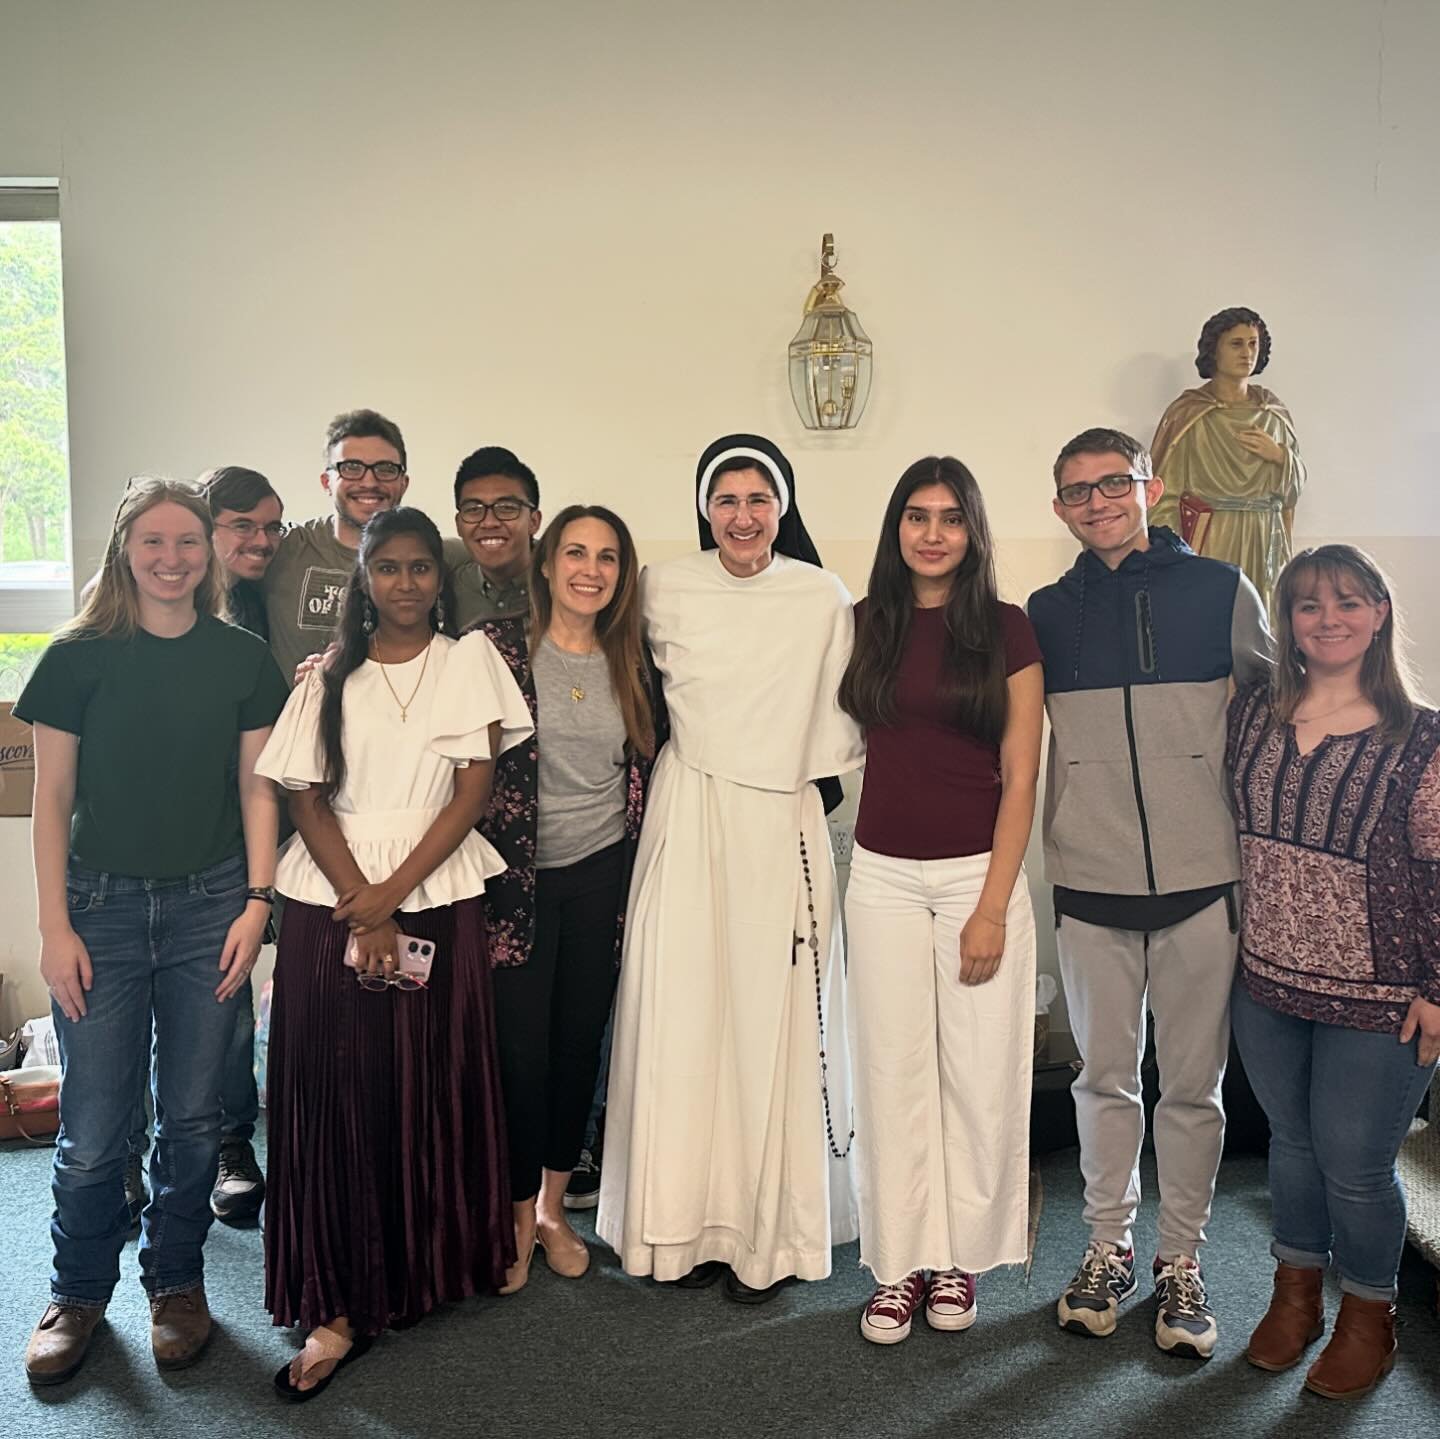 We had a beautiful morning hearing Sr. Lily Anne&rsquo;s vocation story, her music and sharing in Q &amp; A at Mater Ecclesiae. Her story was uplifting and inspiring to our students. Sister (Nina Camaioni) was the Campus Minister of the Newman House 